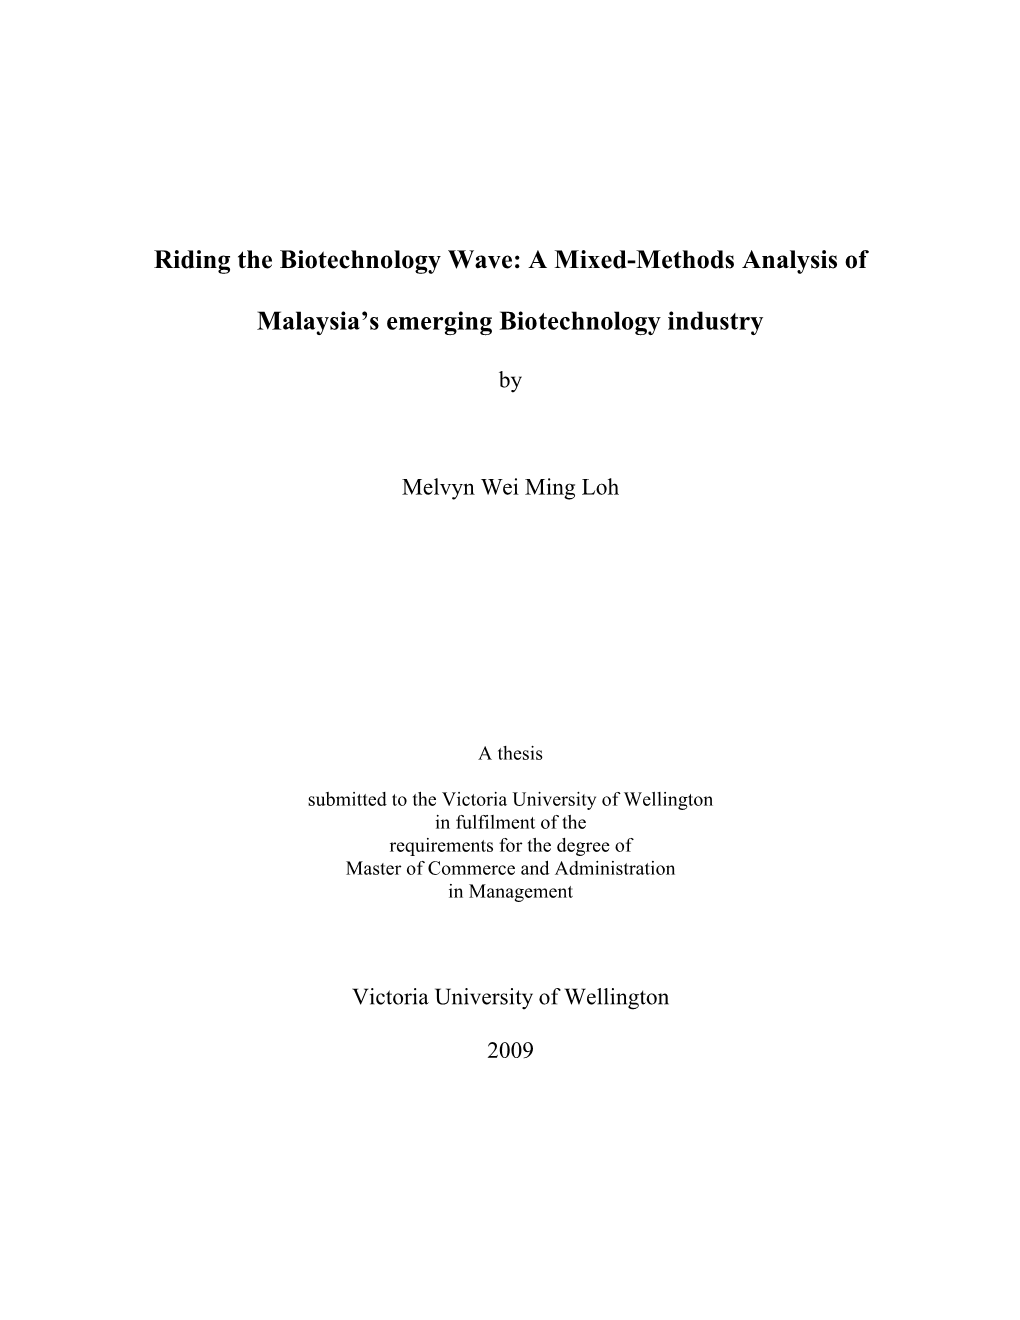 A Mixed-Methods Analysis of Malaysia's Emerging Biotechnology